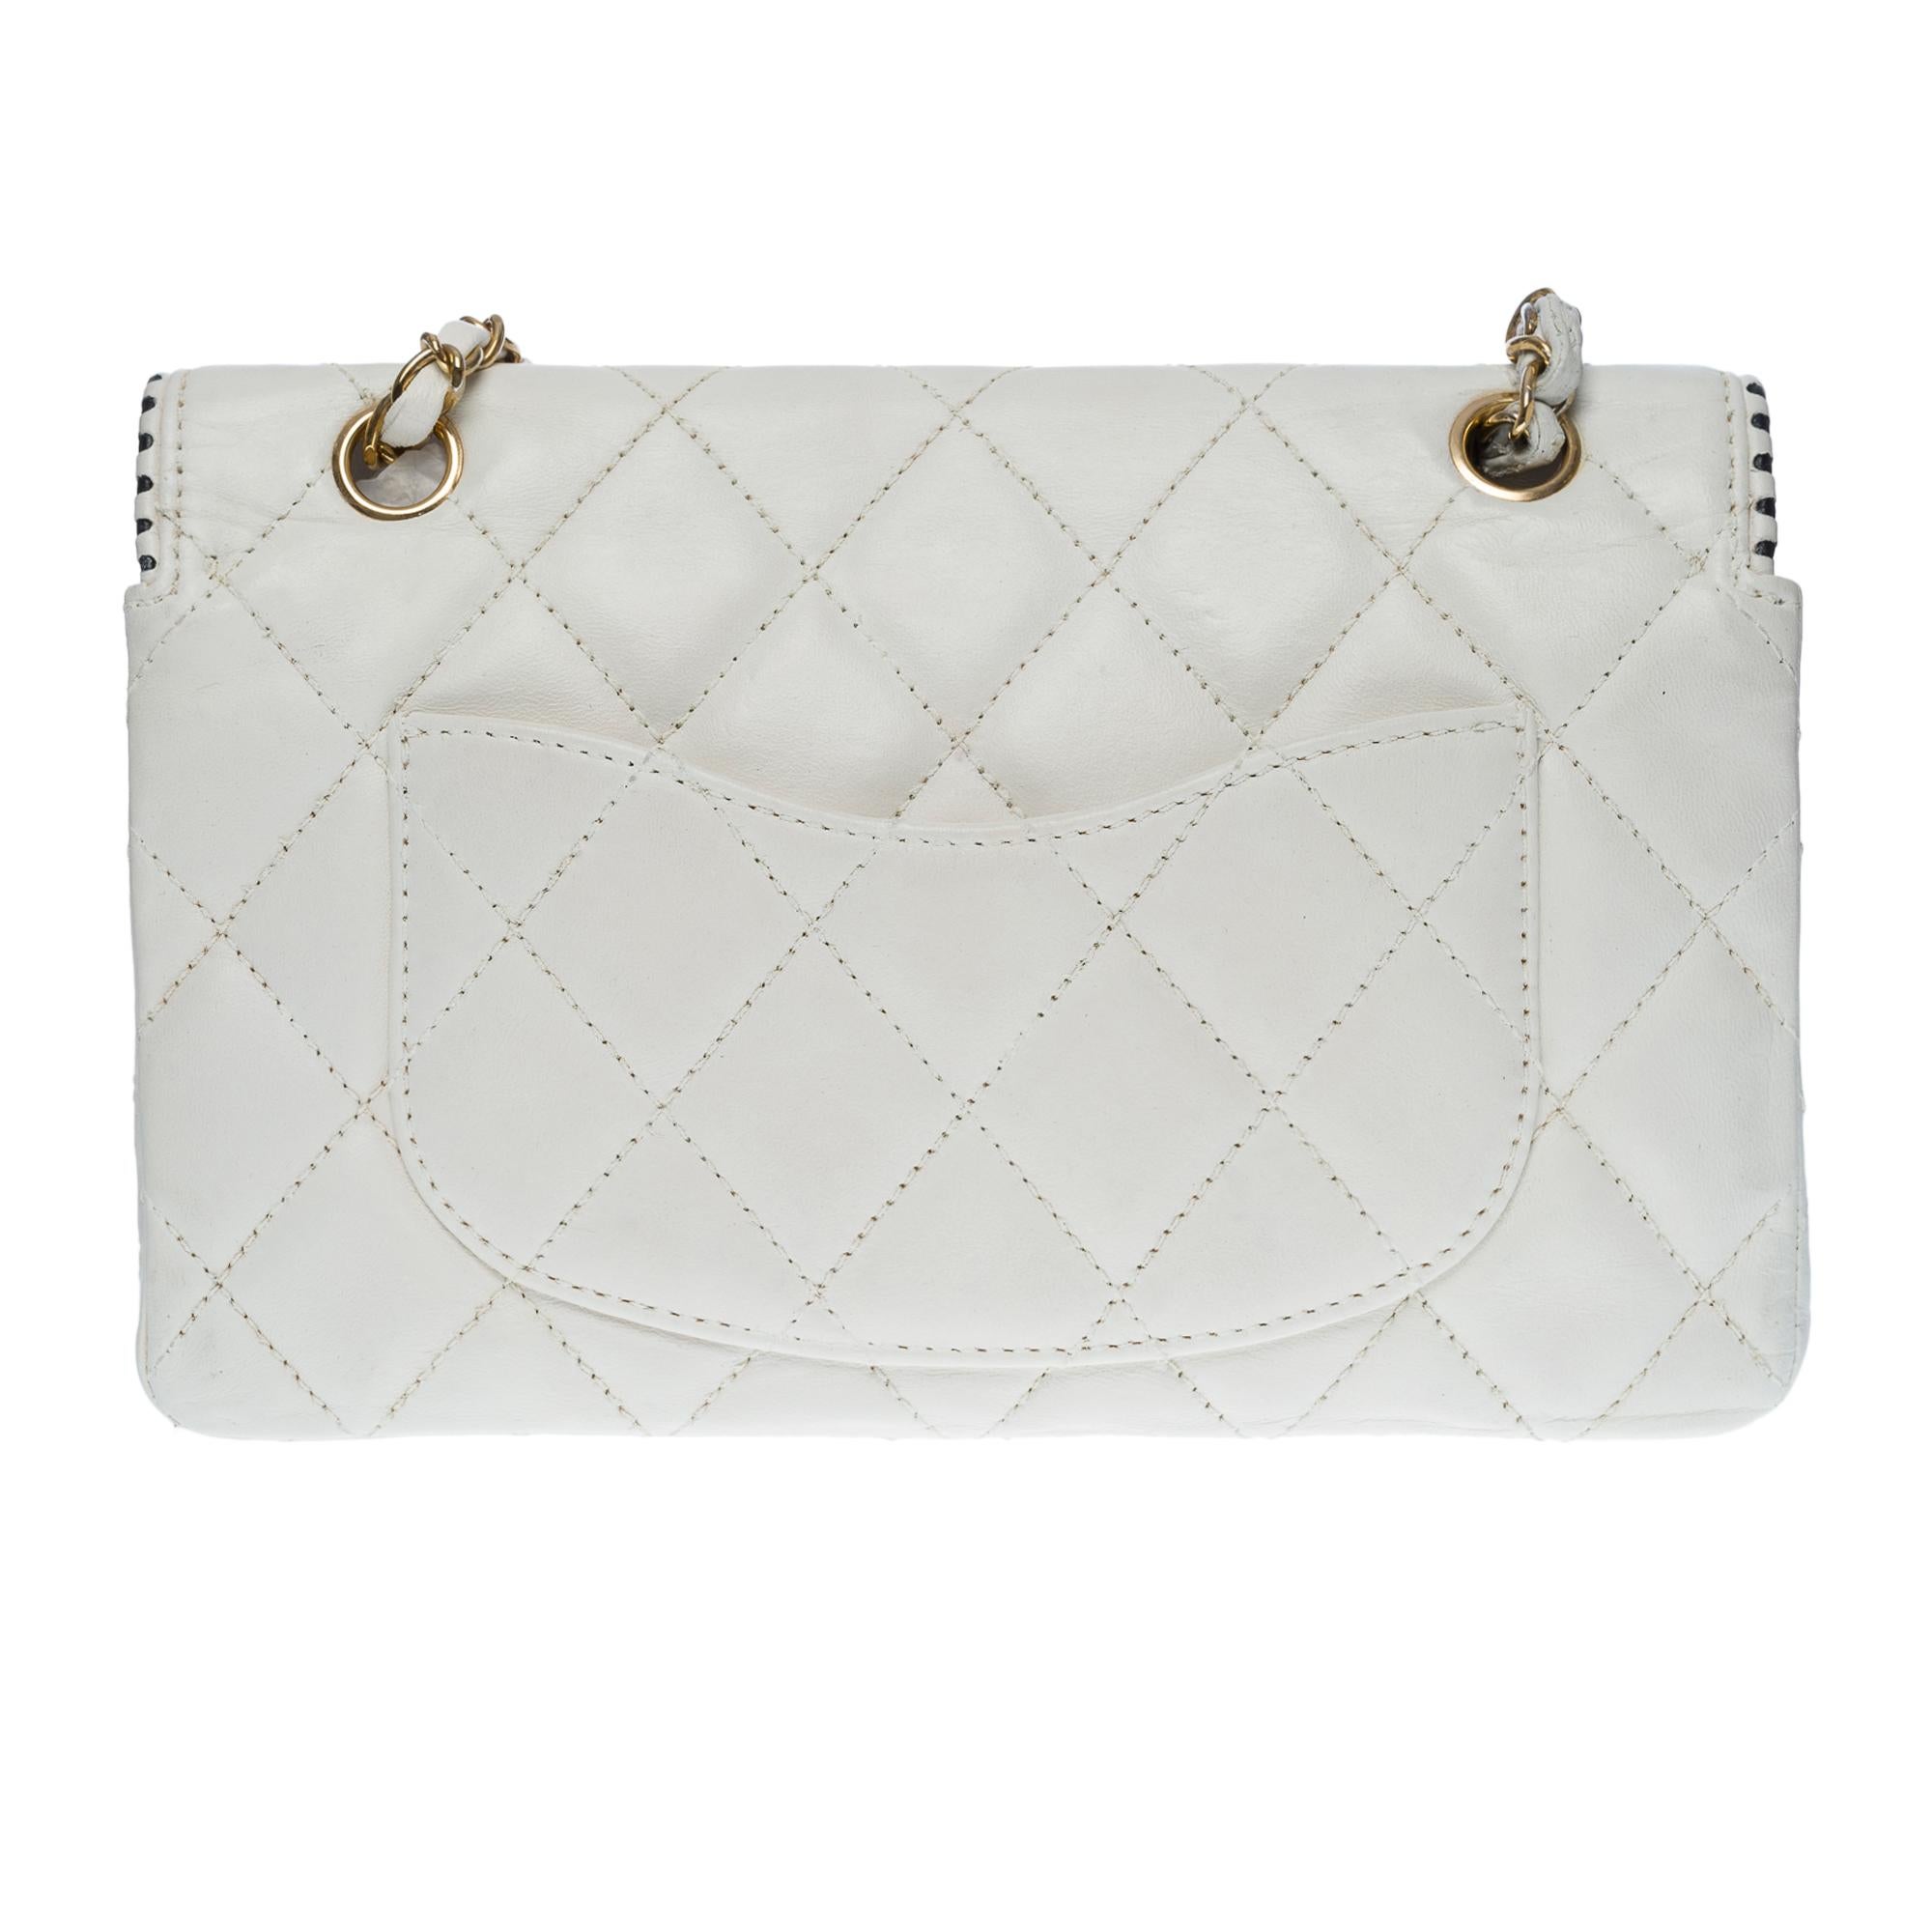 Lovely limited edition Chanel Timeless Medium size single flap shoulder bag in white quilted leather and navy edging dotted on flap, gold metal hardware, gold metal chain interwoven with white leather
Flap closure, gold-tone CC clasp
White leather